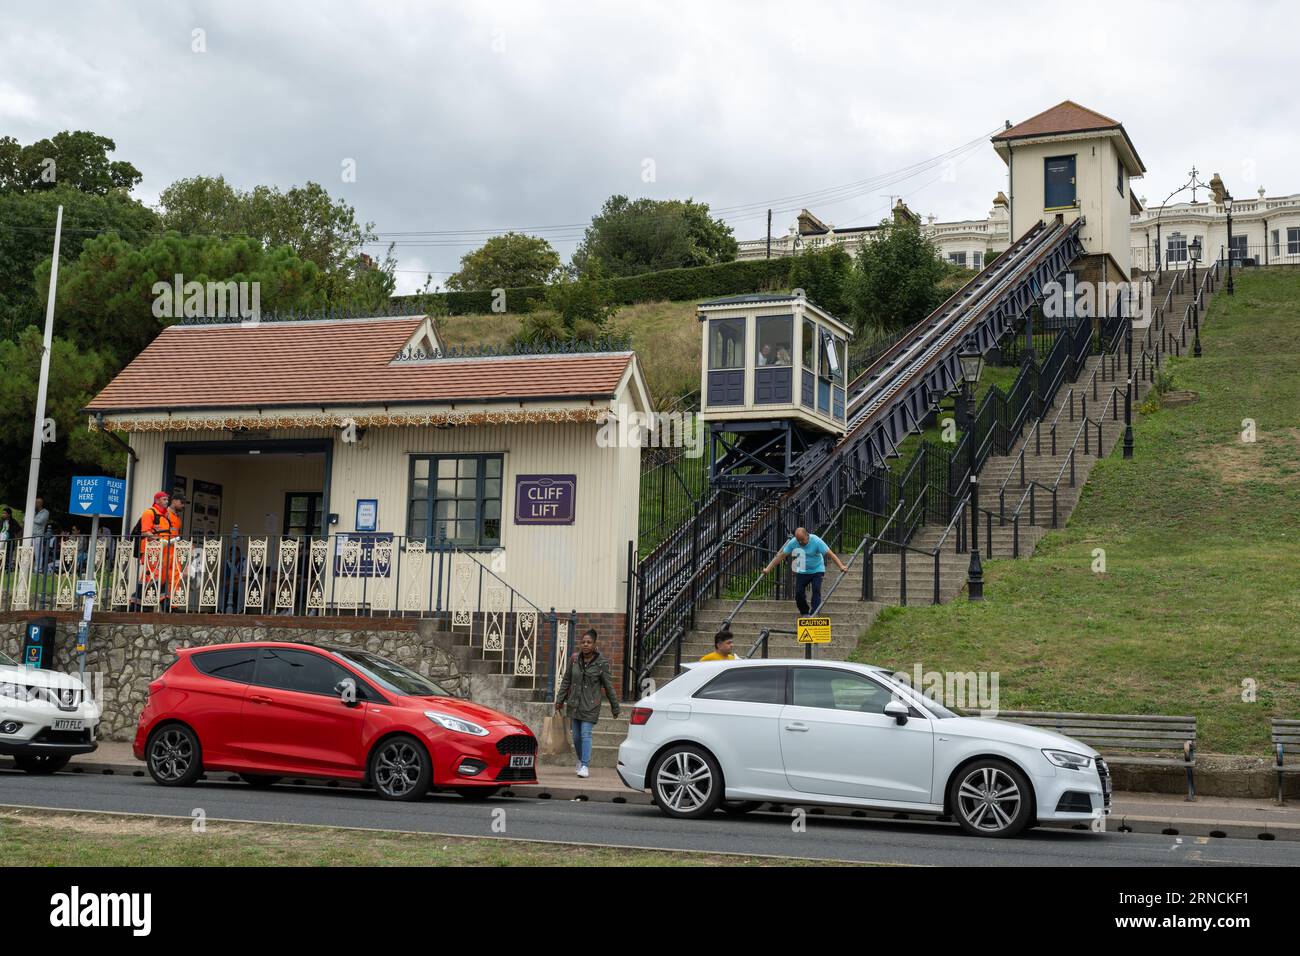 The Cliff Lift at Southend-on-Sea, Essex, England Stock Photo